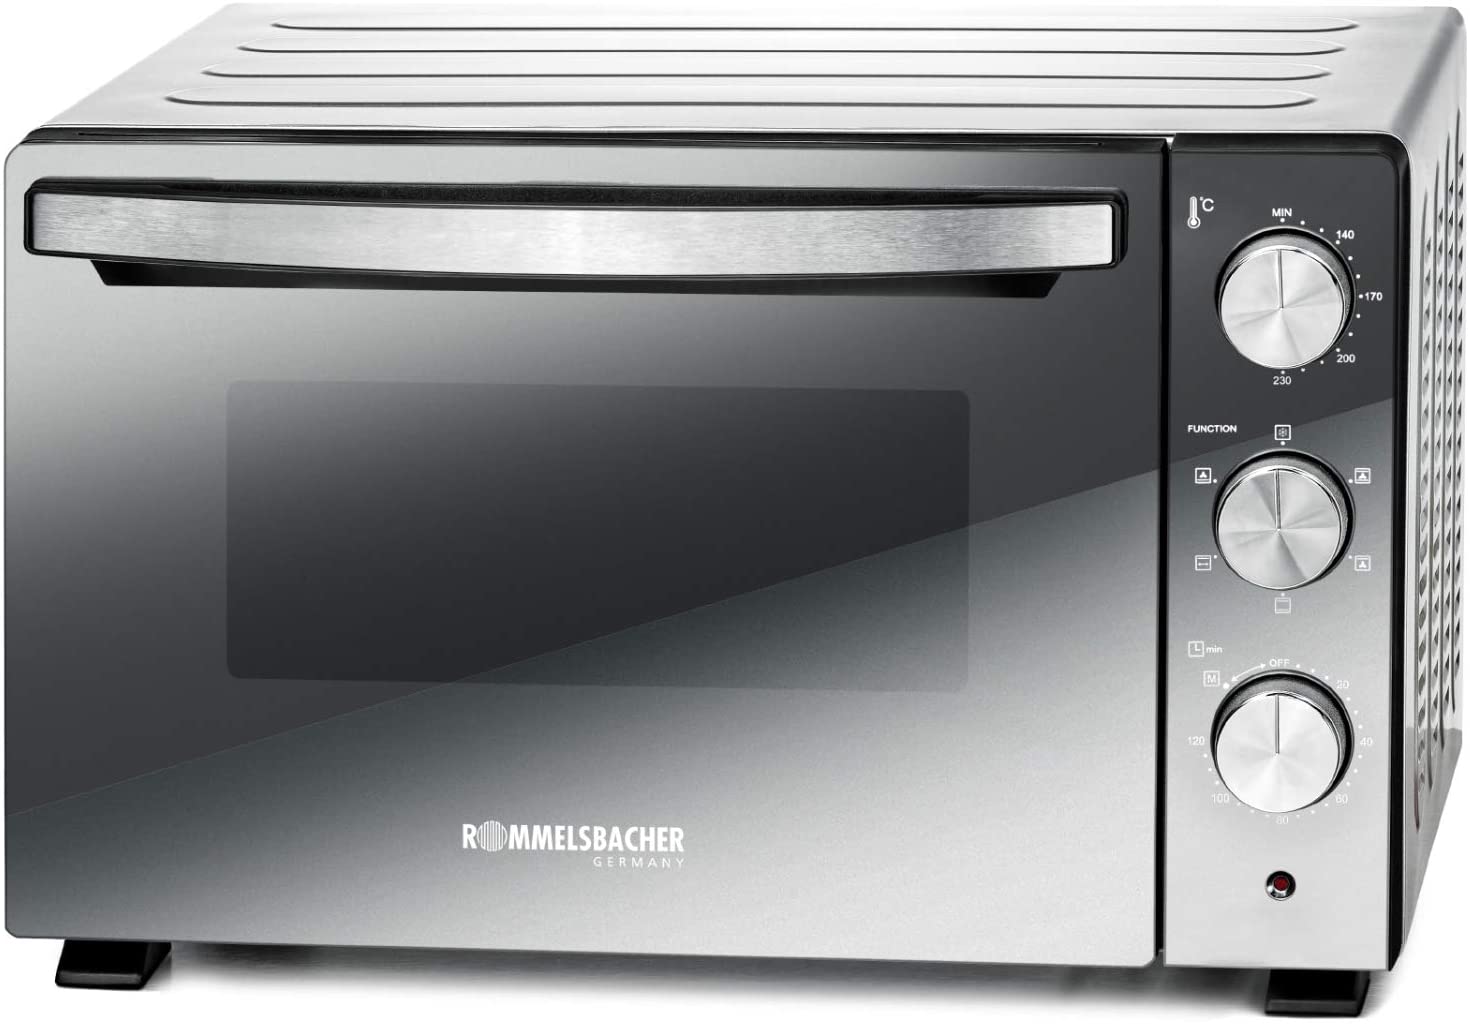 ROMMELSBACHER Back & Grill Oven BGS 1500 - Energy Saving & Efficient, Non-Stick Baking Area, 6 Heat Types, Rotisserie Spit, 120 Minute Timer, Double Glazing, Silver, 1500 W, Stainless Steel